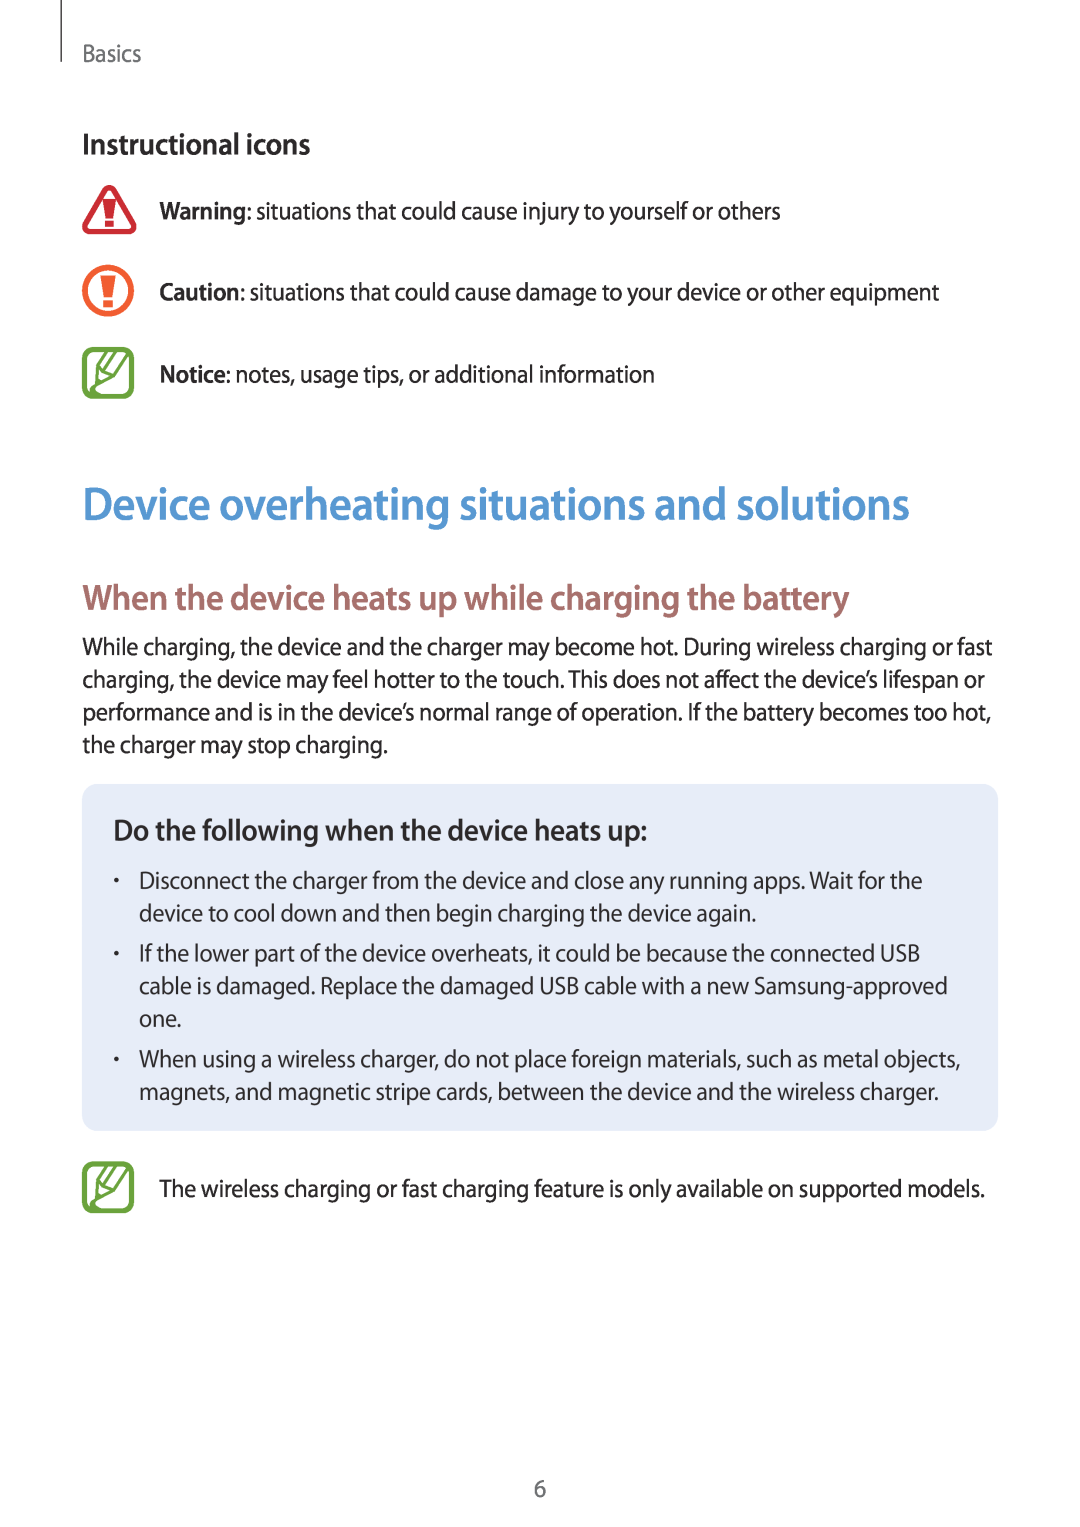 Samsung SM-A530FZVATIM Device overheating situations and solutions, When the device heats up while charging the battery 